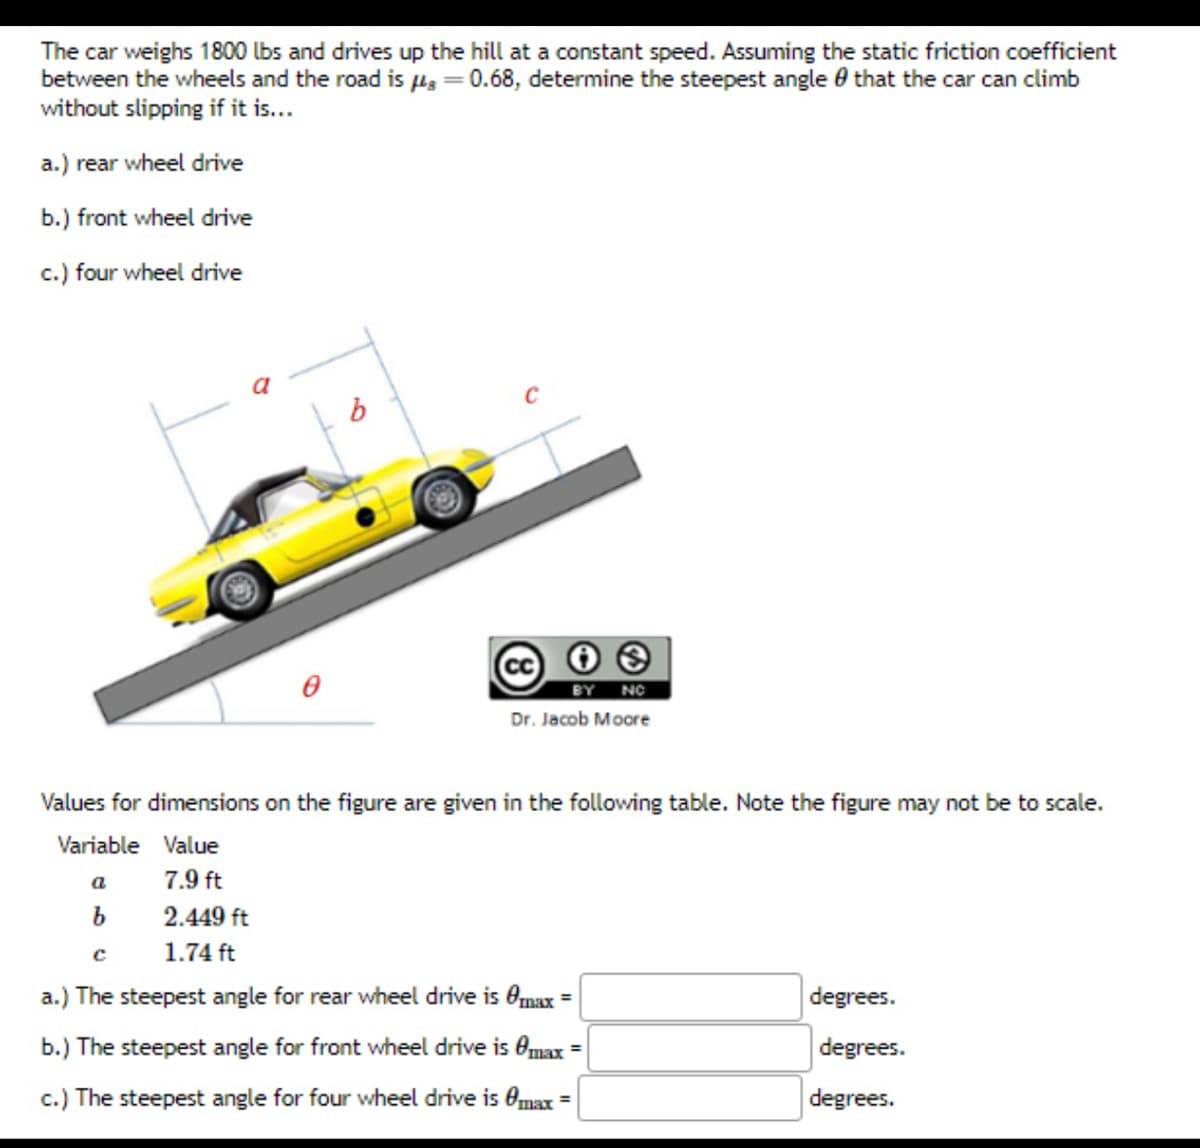 The car weighs 1800 lbs and drives up the hill at a constant speed. Assuming the static friction coefficient
between the wheels and the road is g = 0.68, determine the steepest angle that the car can climb
without slipping if it is...
a.) rear wheel drive
b.) front wheel drive
c.) four wheel drive
b
a
b
BY NO
Dr. Jacob Moore
Values for dimensions on the figure are given in the following table. Note the figure may not be to scale.
Variable Value
7.9 ft
2.449 ft
с
1.74 ft
a.) The steepest angle for rear wheel drive is Omax =
b.) The steepest angle for front wheel drive is max =
c.) The steepest angle for four wheel drive is max
degrees.
degrees.
degrees.